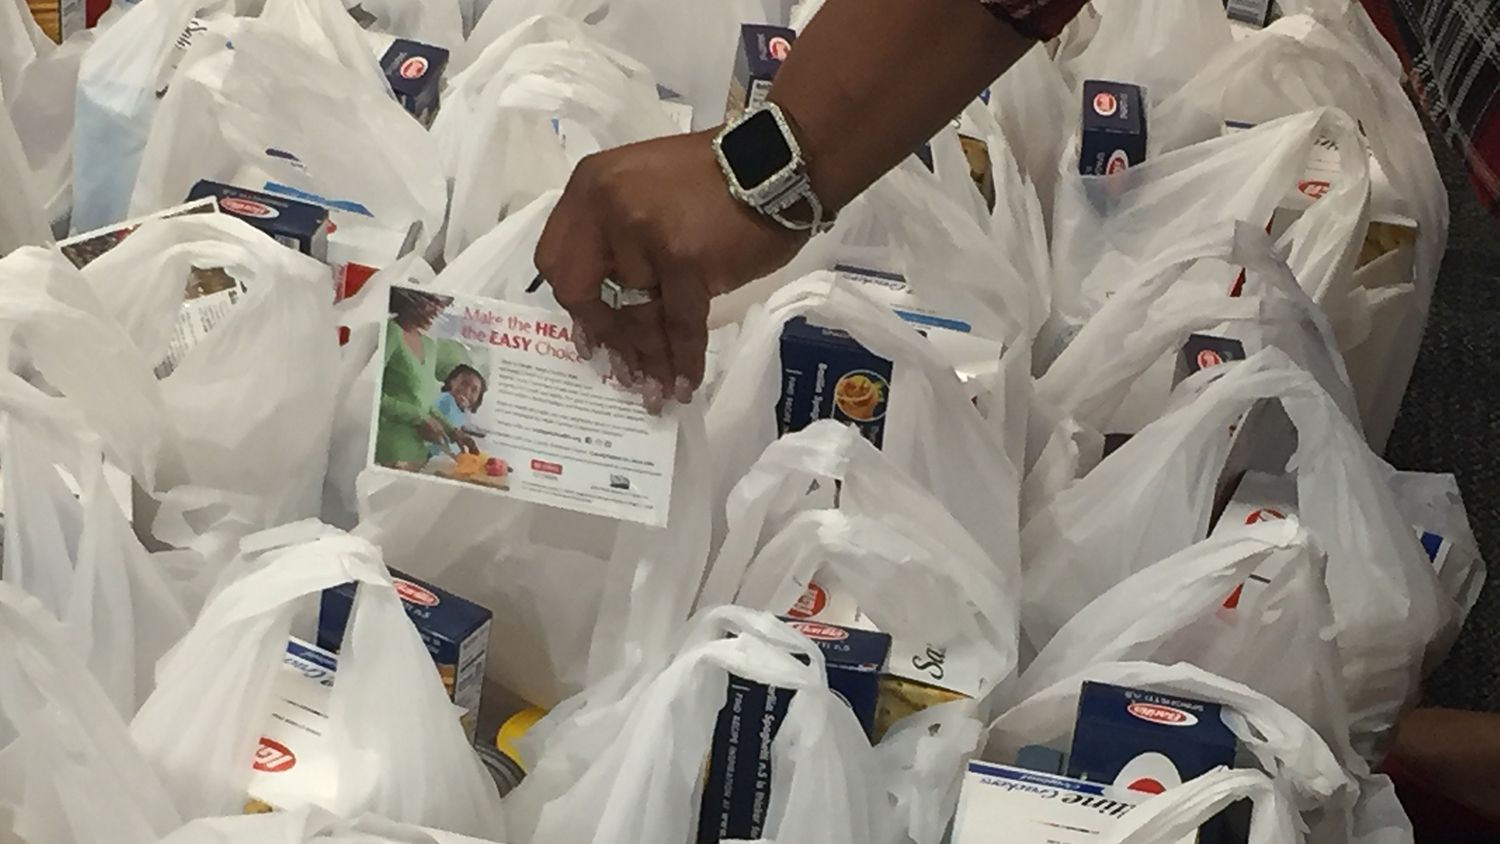 A person's hand puts an information card into a bag of food.